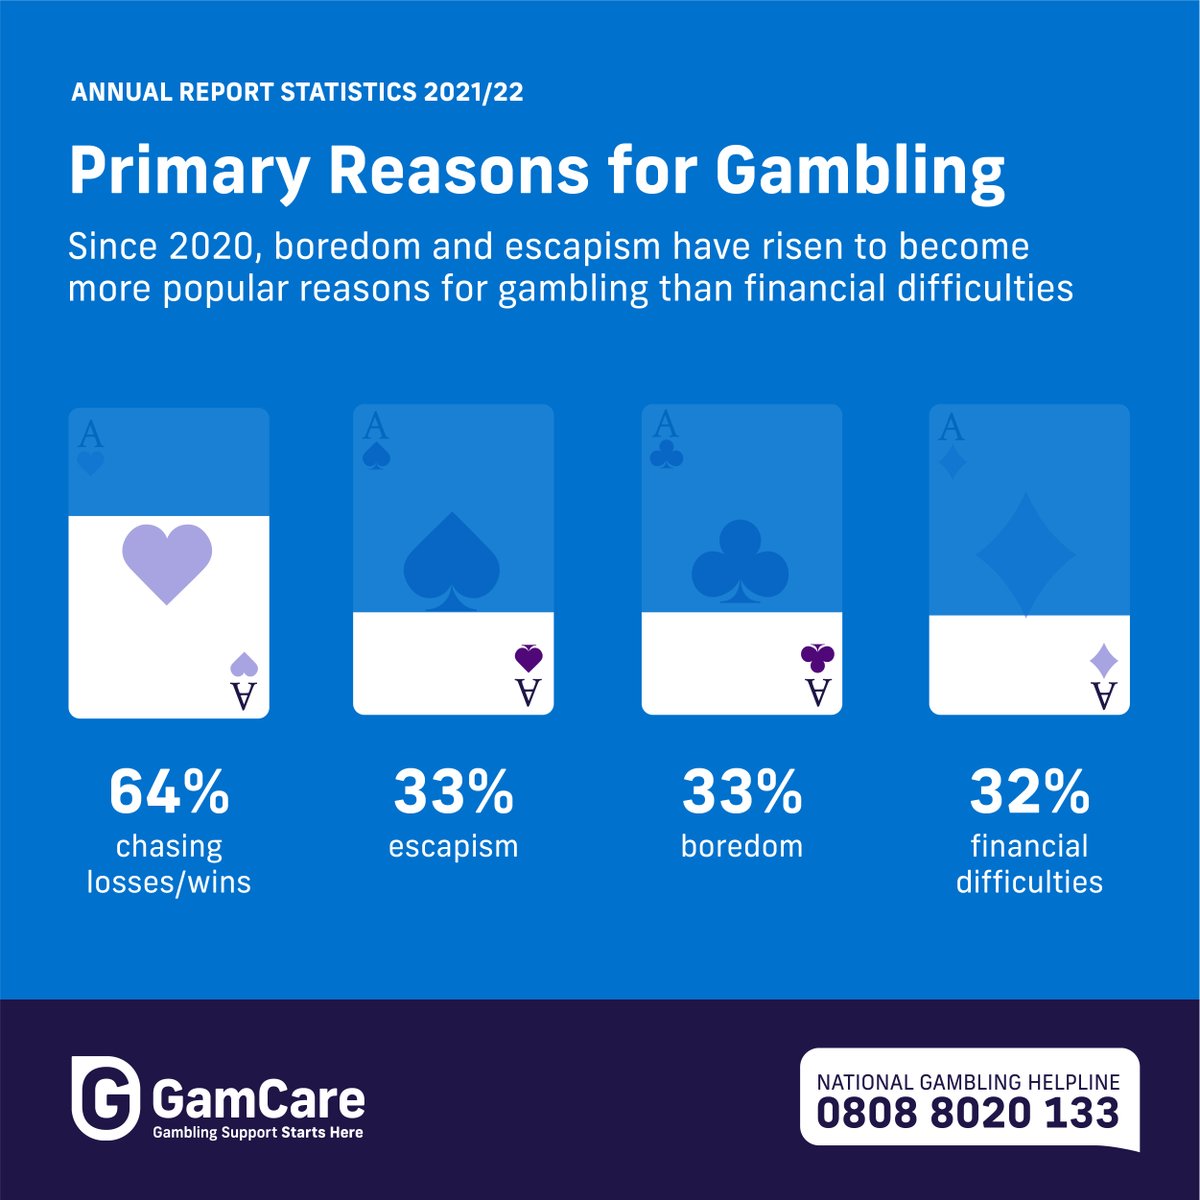 The most common reason for gambling we hear is chasing losses or wins - which often leads to greater losses. Read more insights from our Annual Report: ow.ly/w9ll50LJL1G